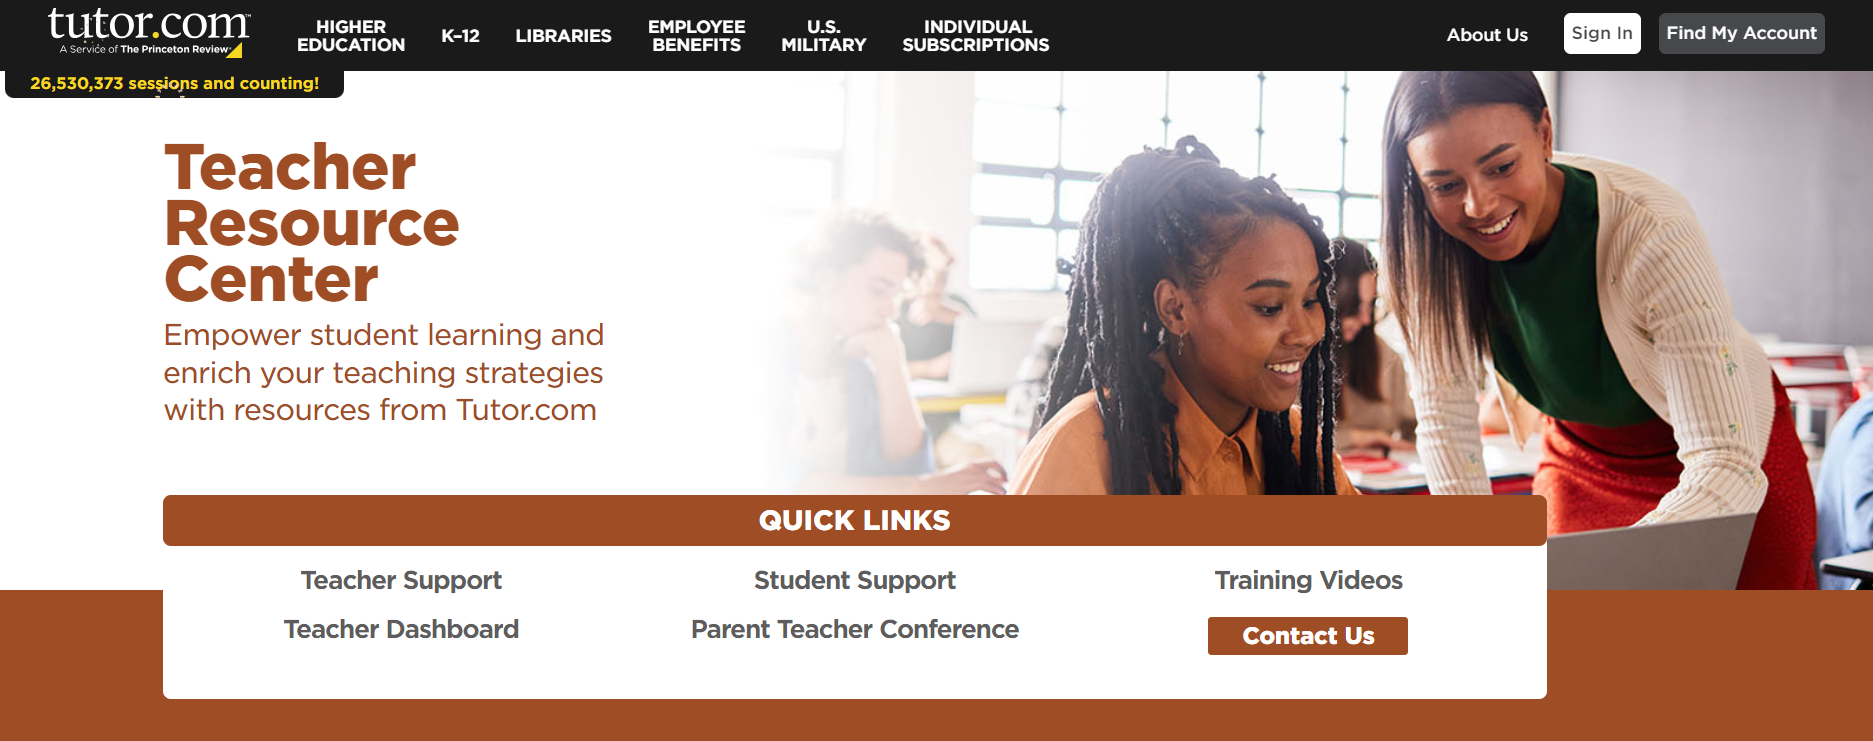 Clickable image of the Teacher Resource Center